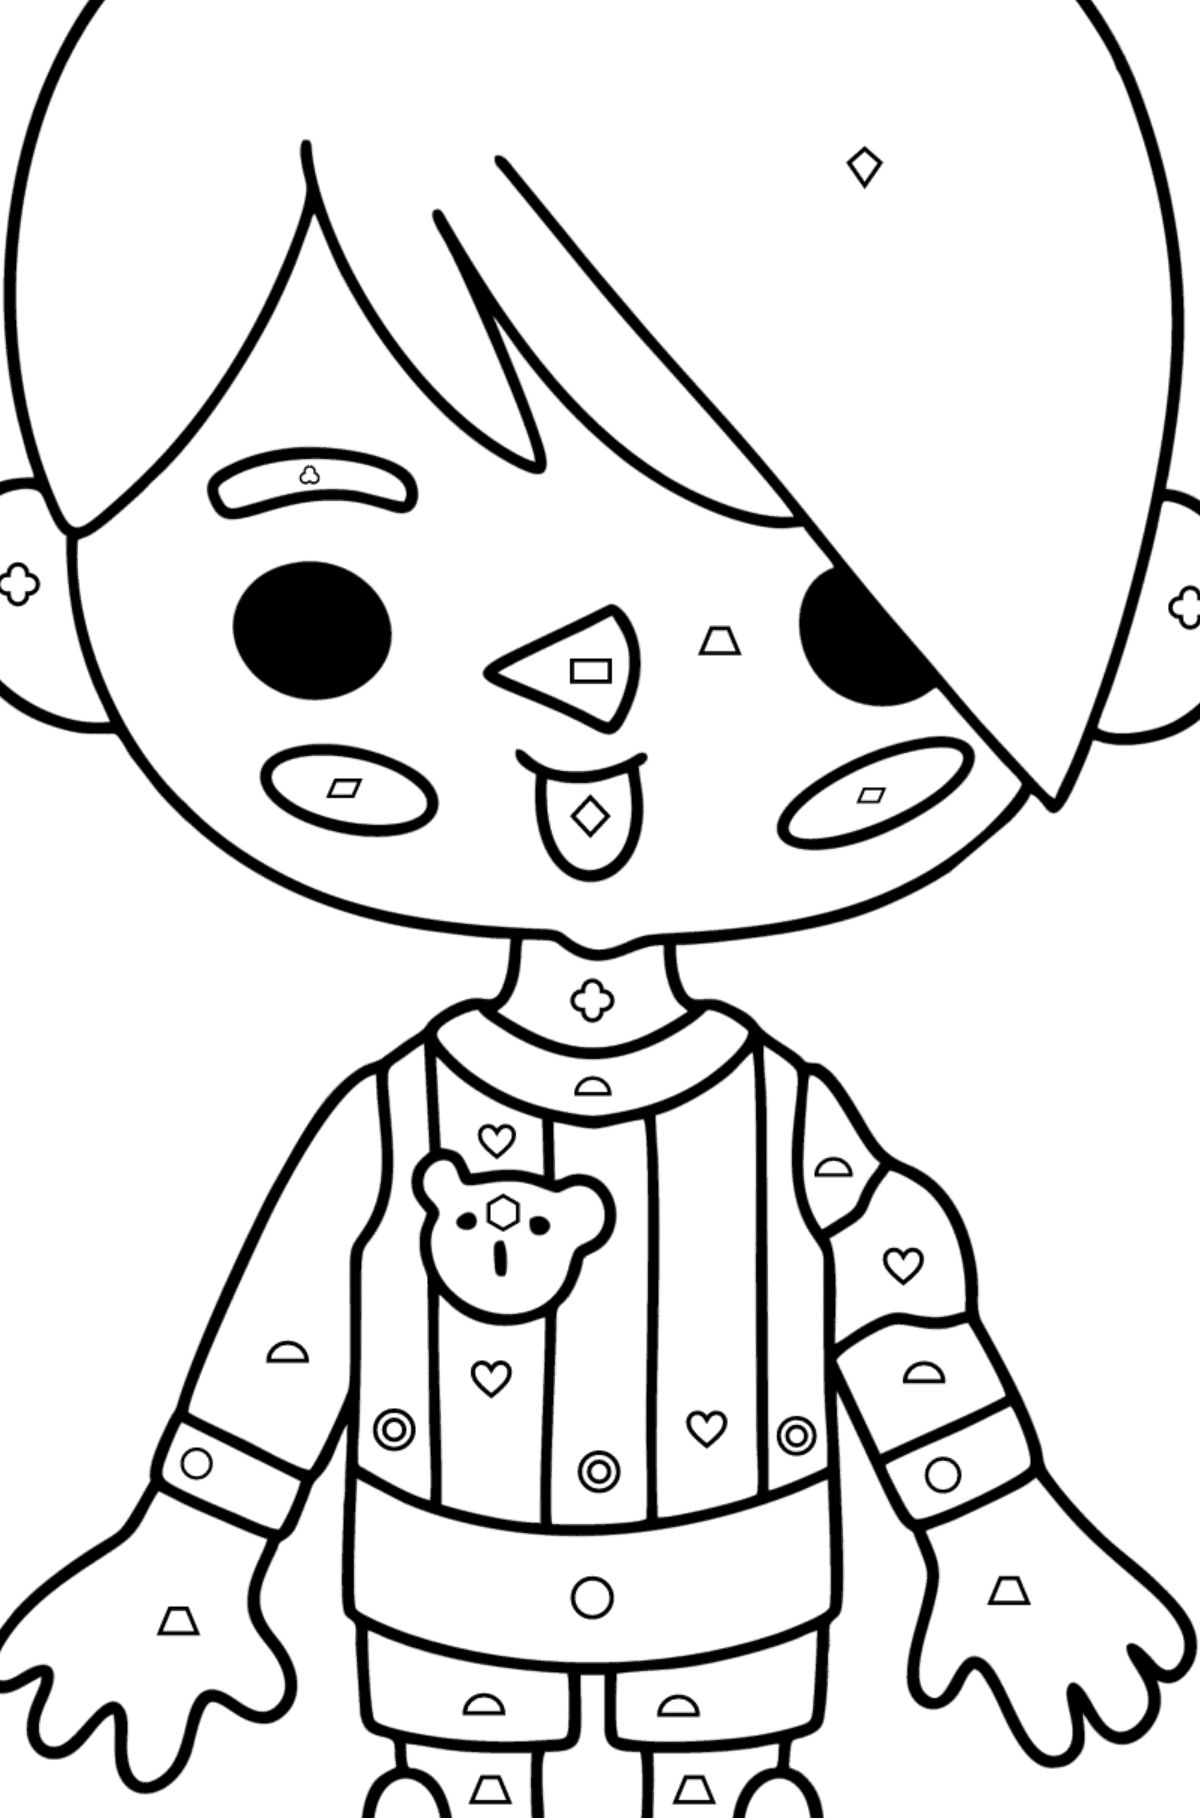 Coloring page Boy tocaboca 05 - Coloring by Geometric Shapes for Kids